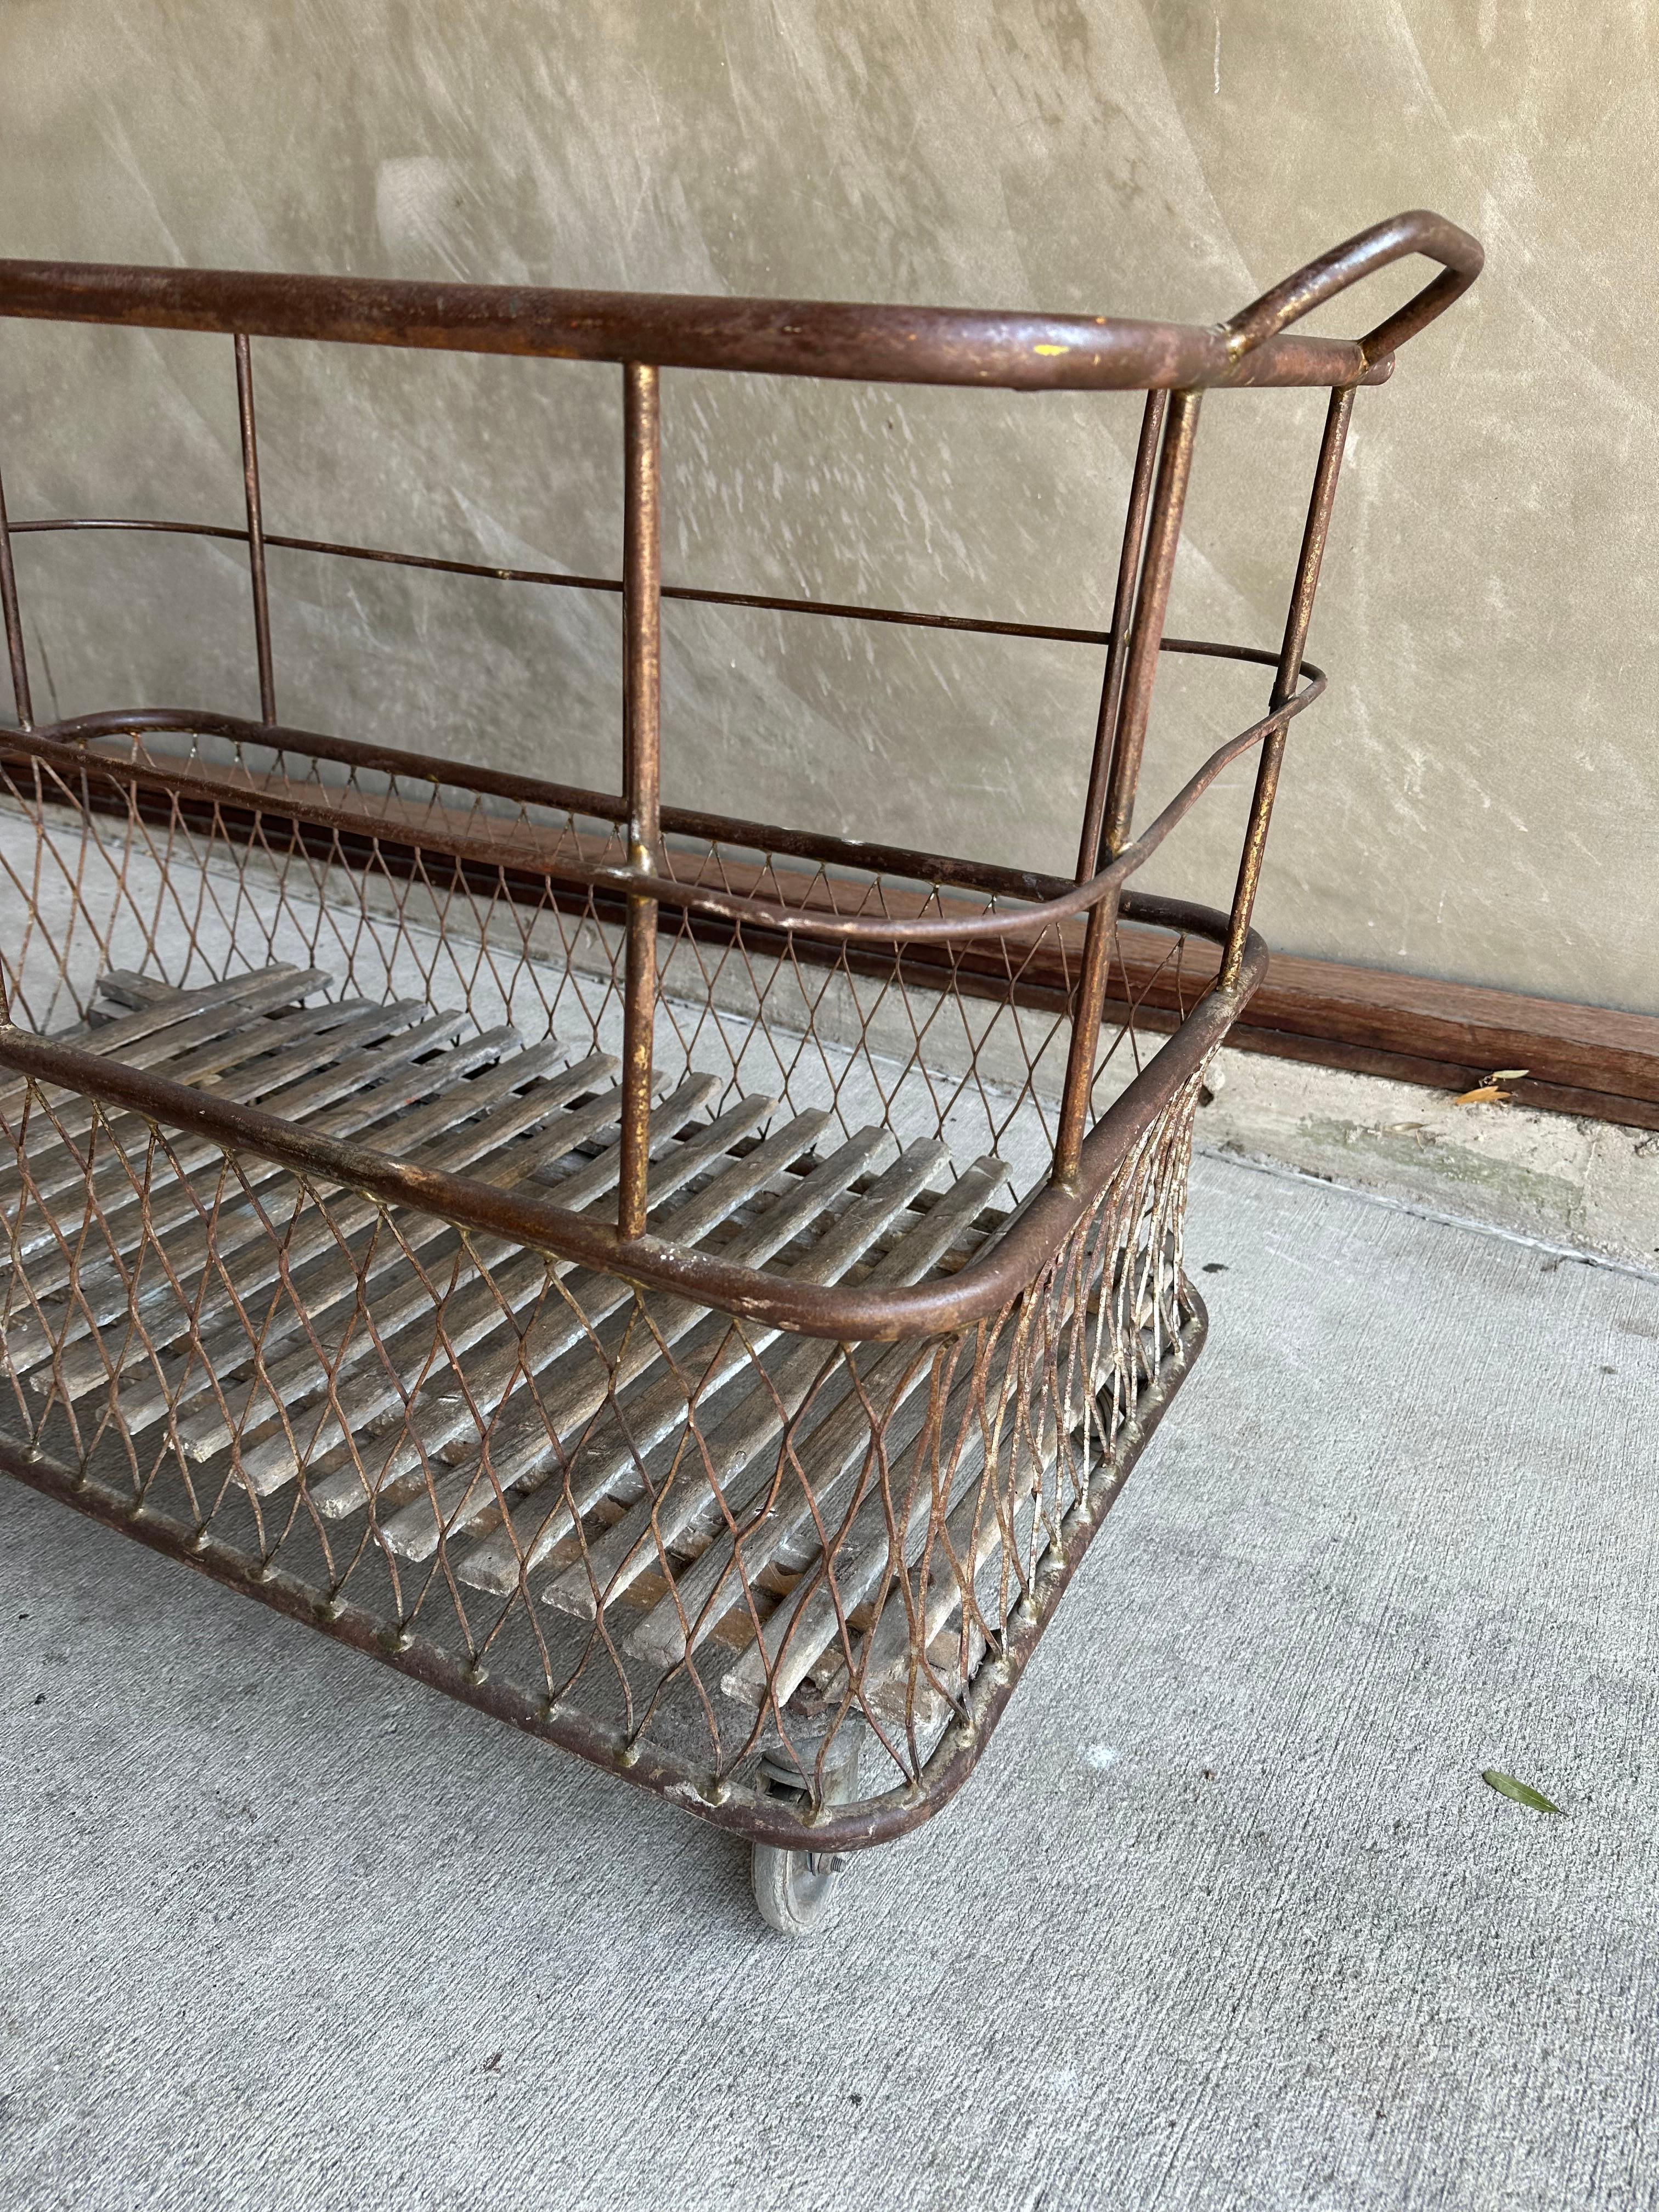 Welded Steel Cart, Trolley, Basket, France, 19th Century In Good Condition For Sale In Austin, TX